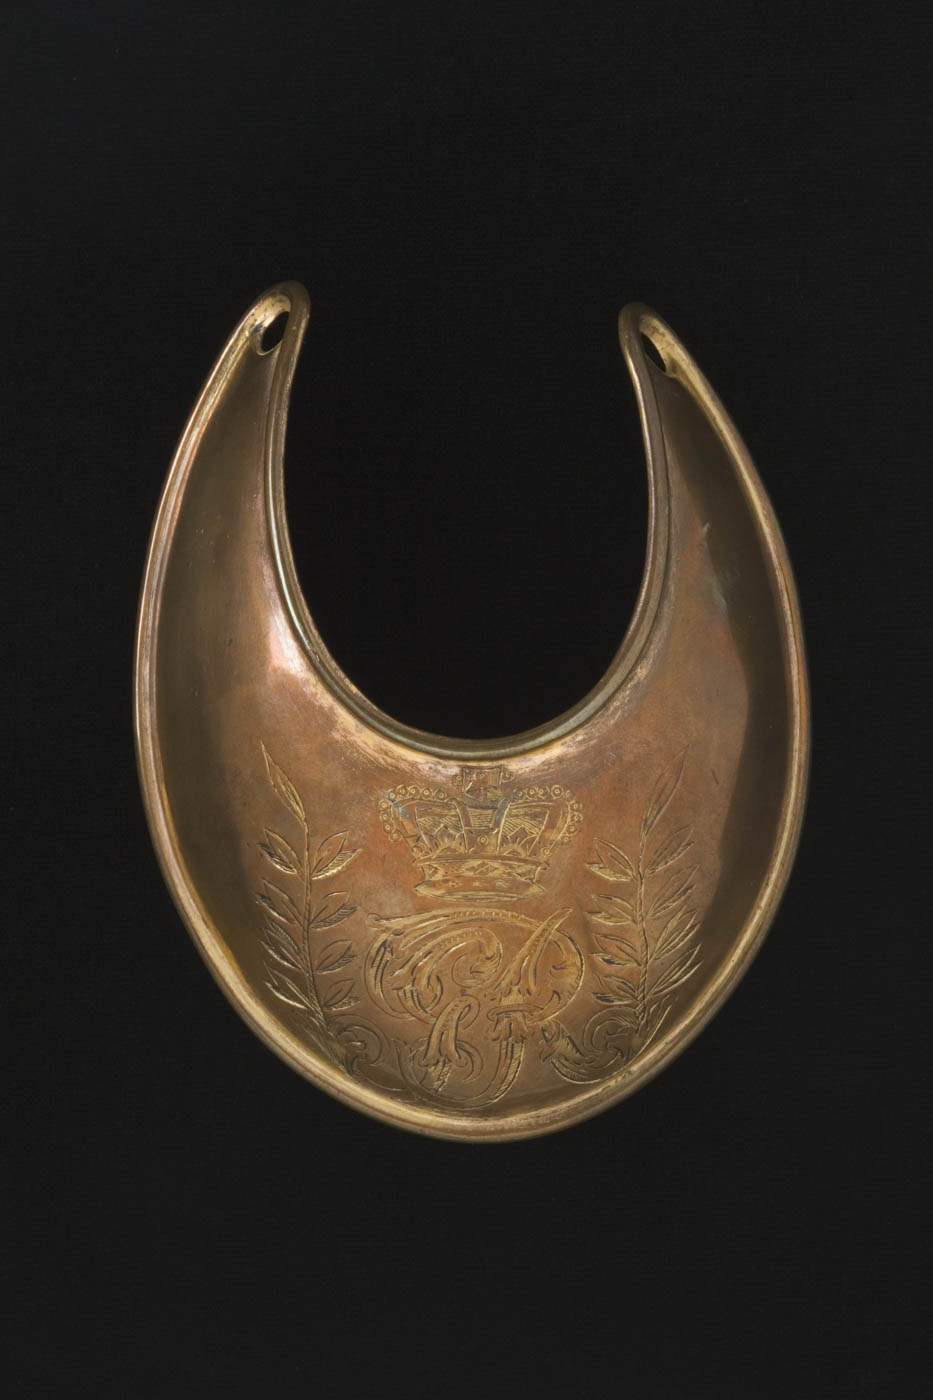 Convex crescentic gorget (breastplate) with tapering arms, made of plated thin brass or copper.